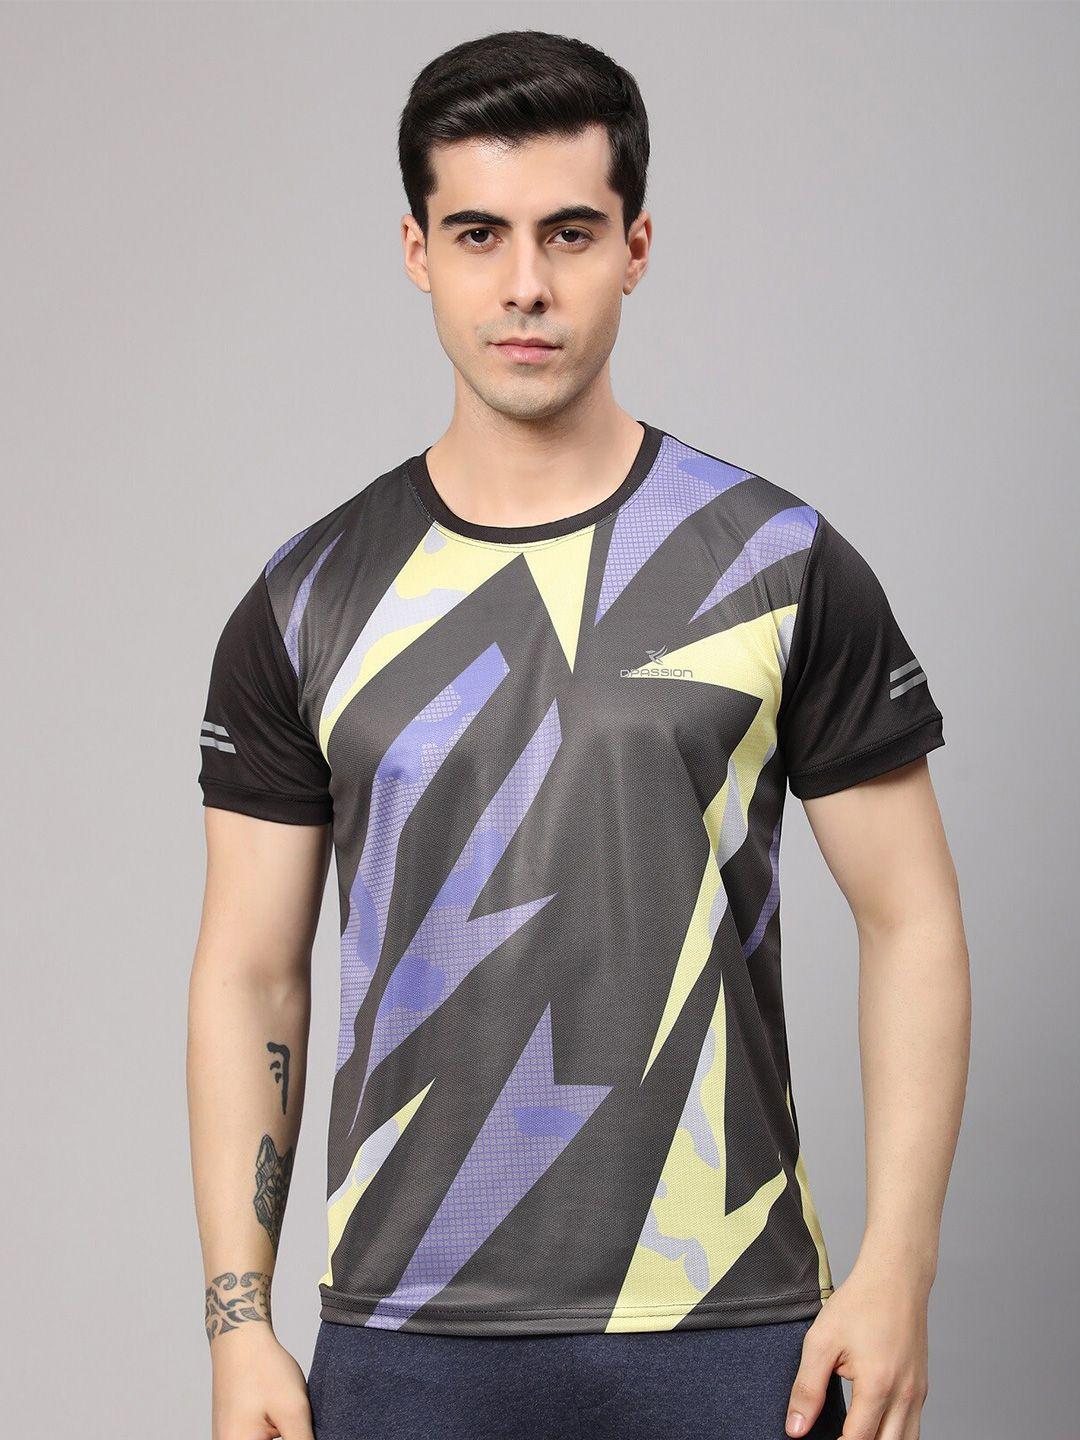 dpassion printed round neck dry fit t-shirt